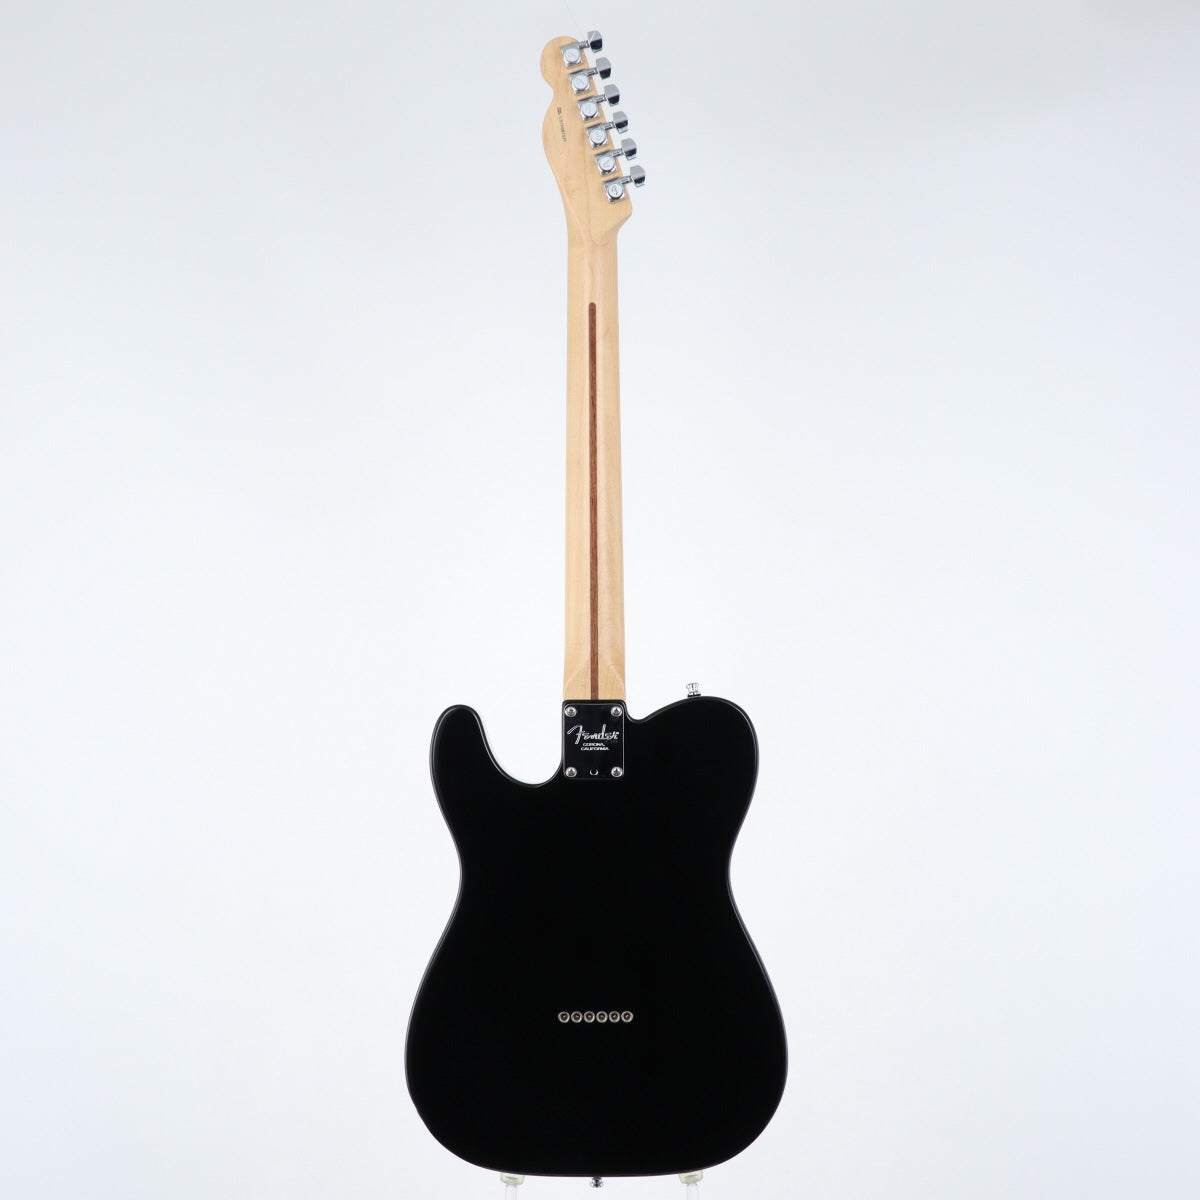 [SN US19087037] USED Fender USA / Limited Edition American QMT Telecaster PME Transparent Black [11]